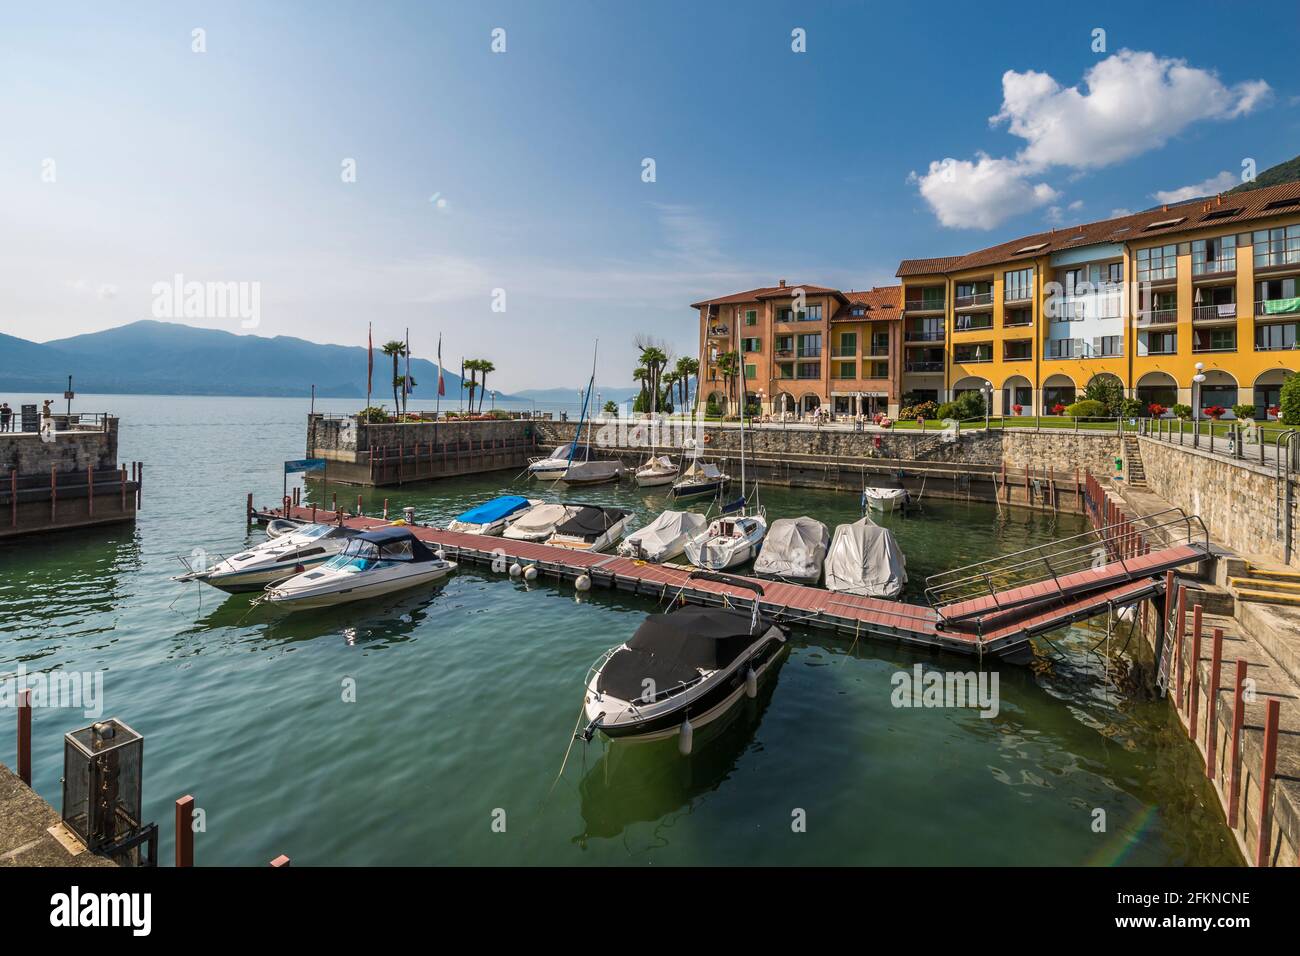 View of lakeside harbour at Cannero Riviera, Lake Maggiore, Piedmont, Italy, Europe Stock Photo